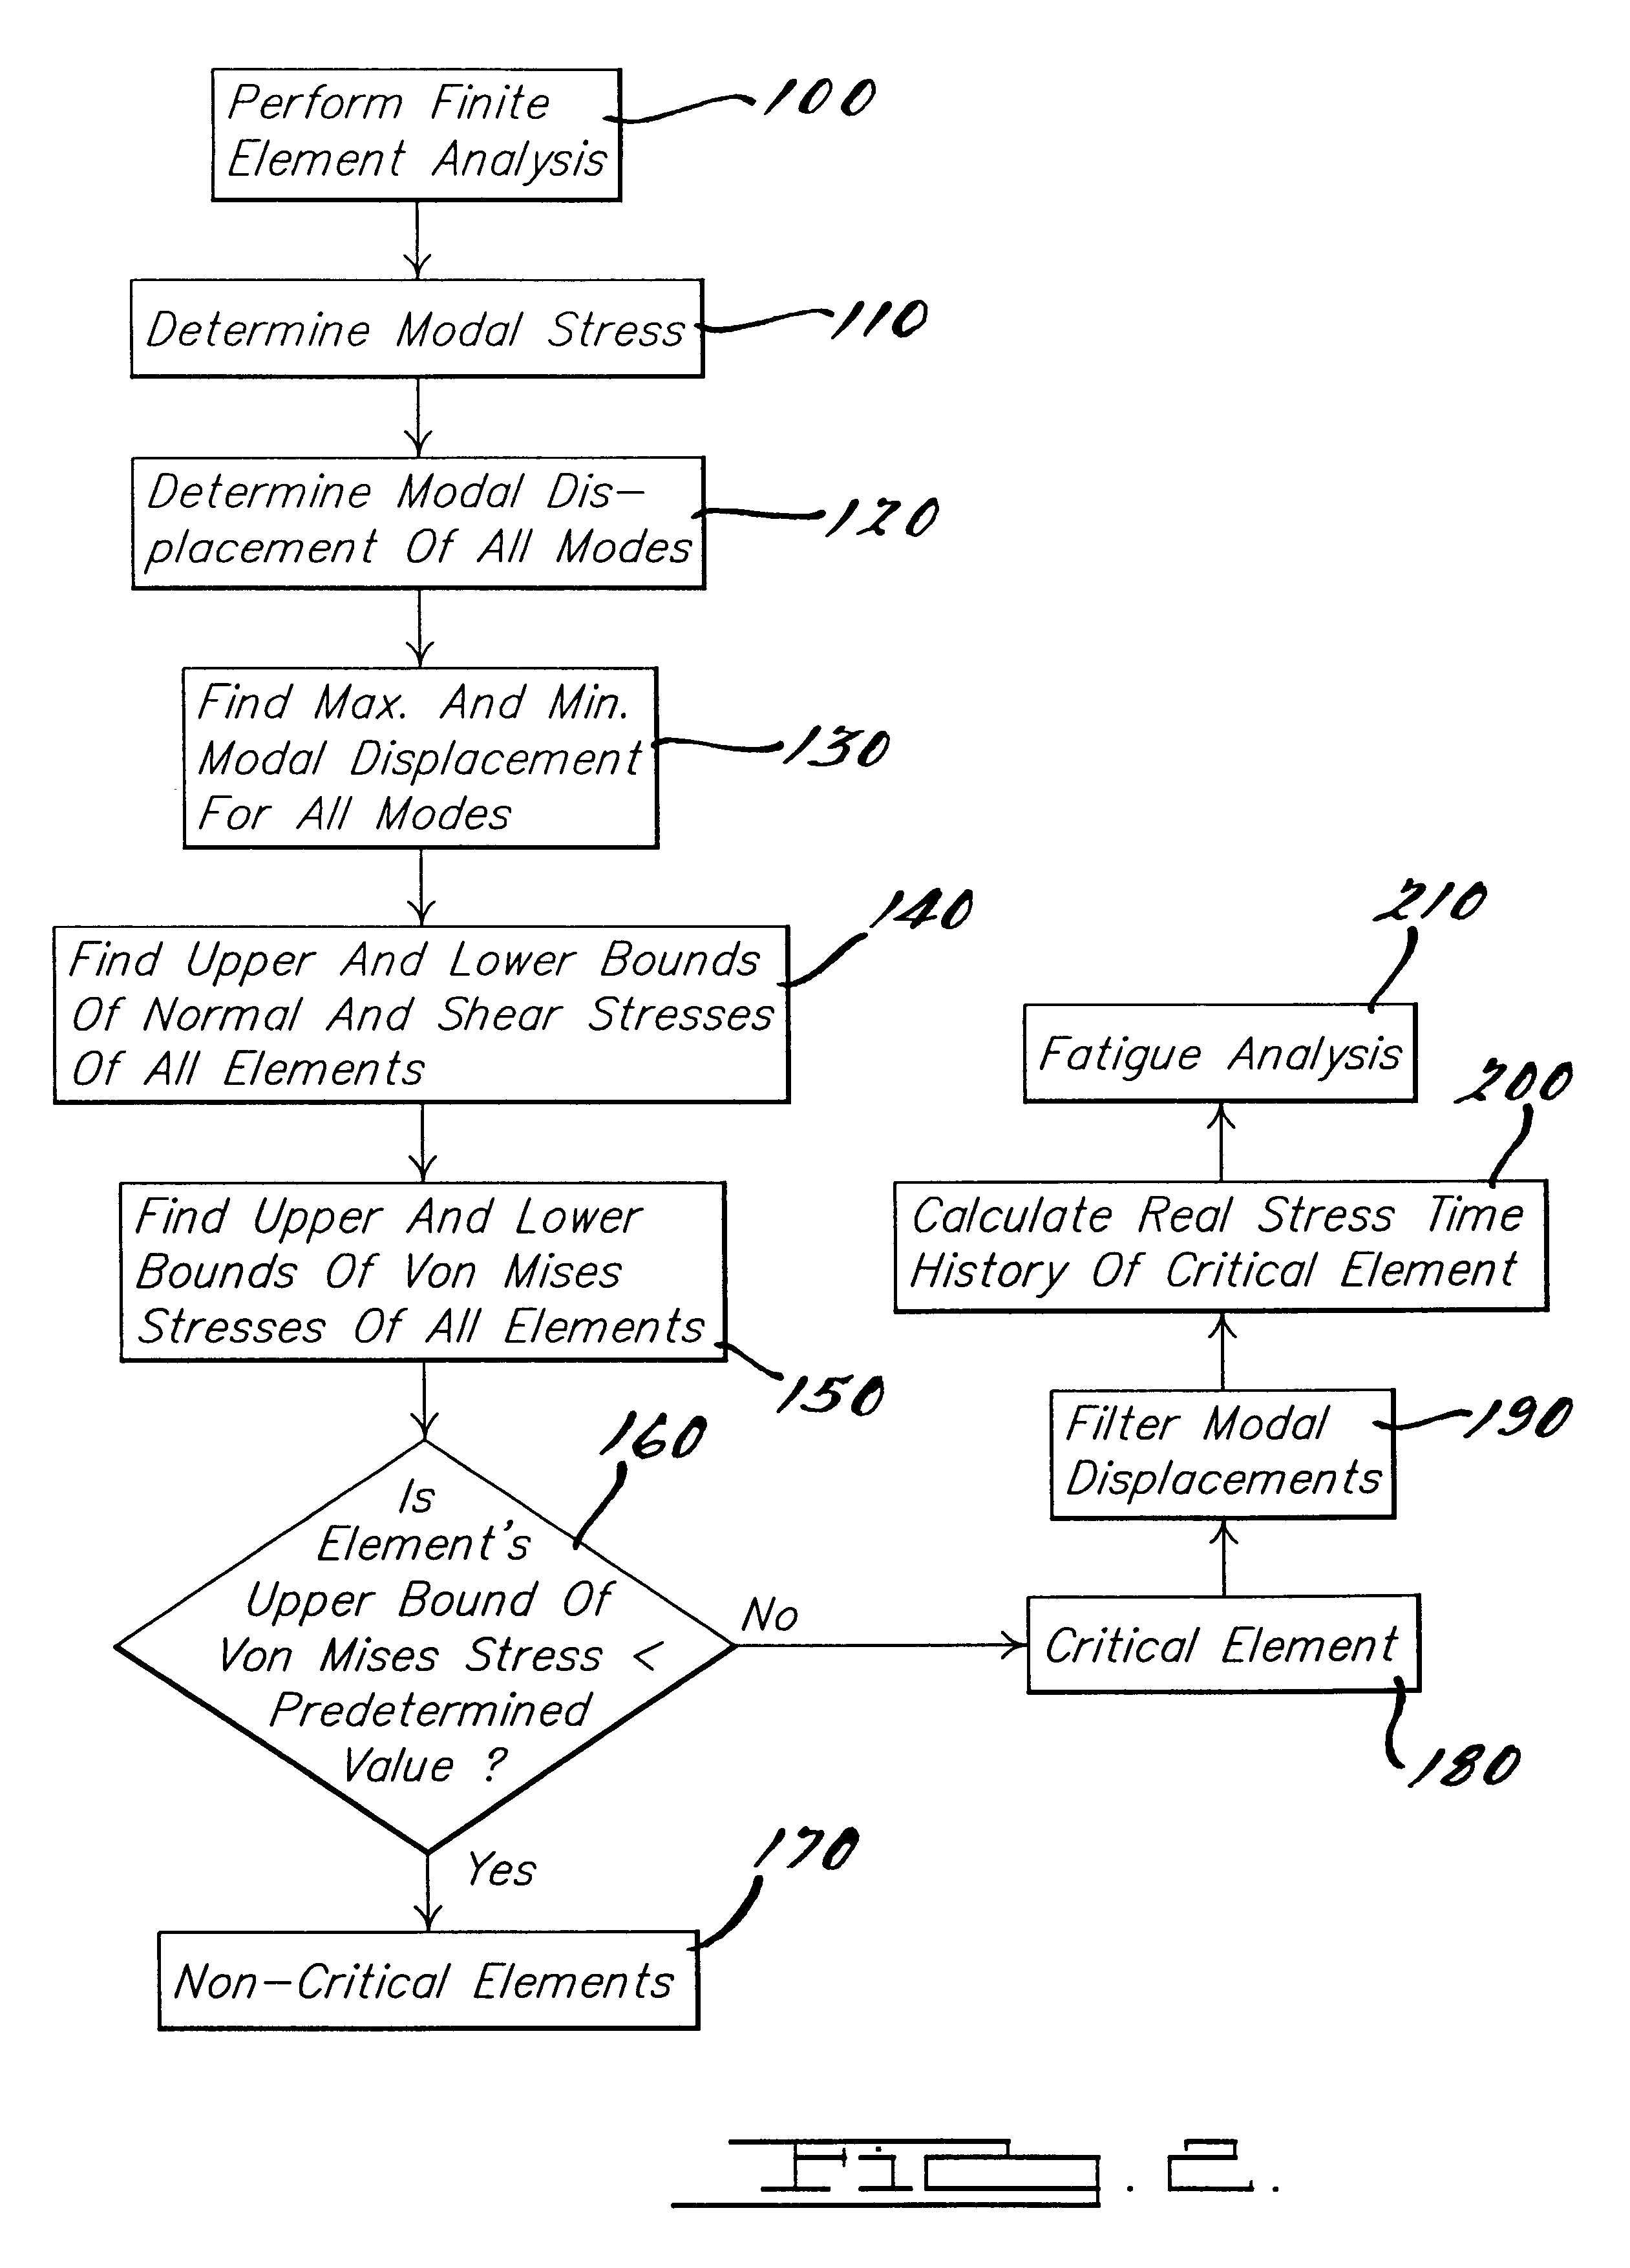 Method of identifying critical elements in fatigue analysis with von mises stress bounding and filtering modal displacement history using dynamic windowing